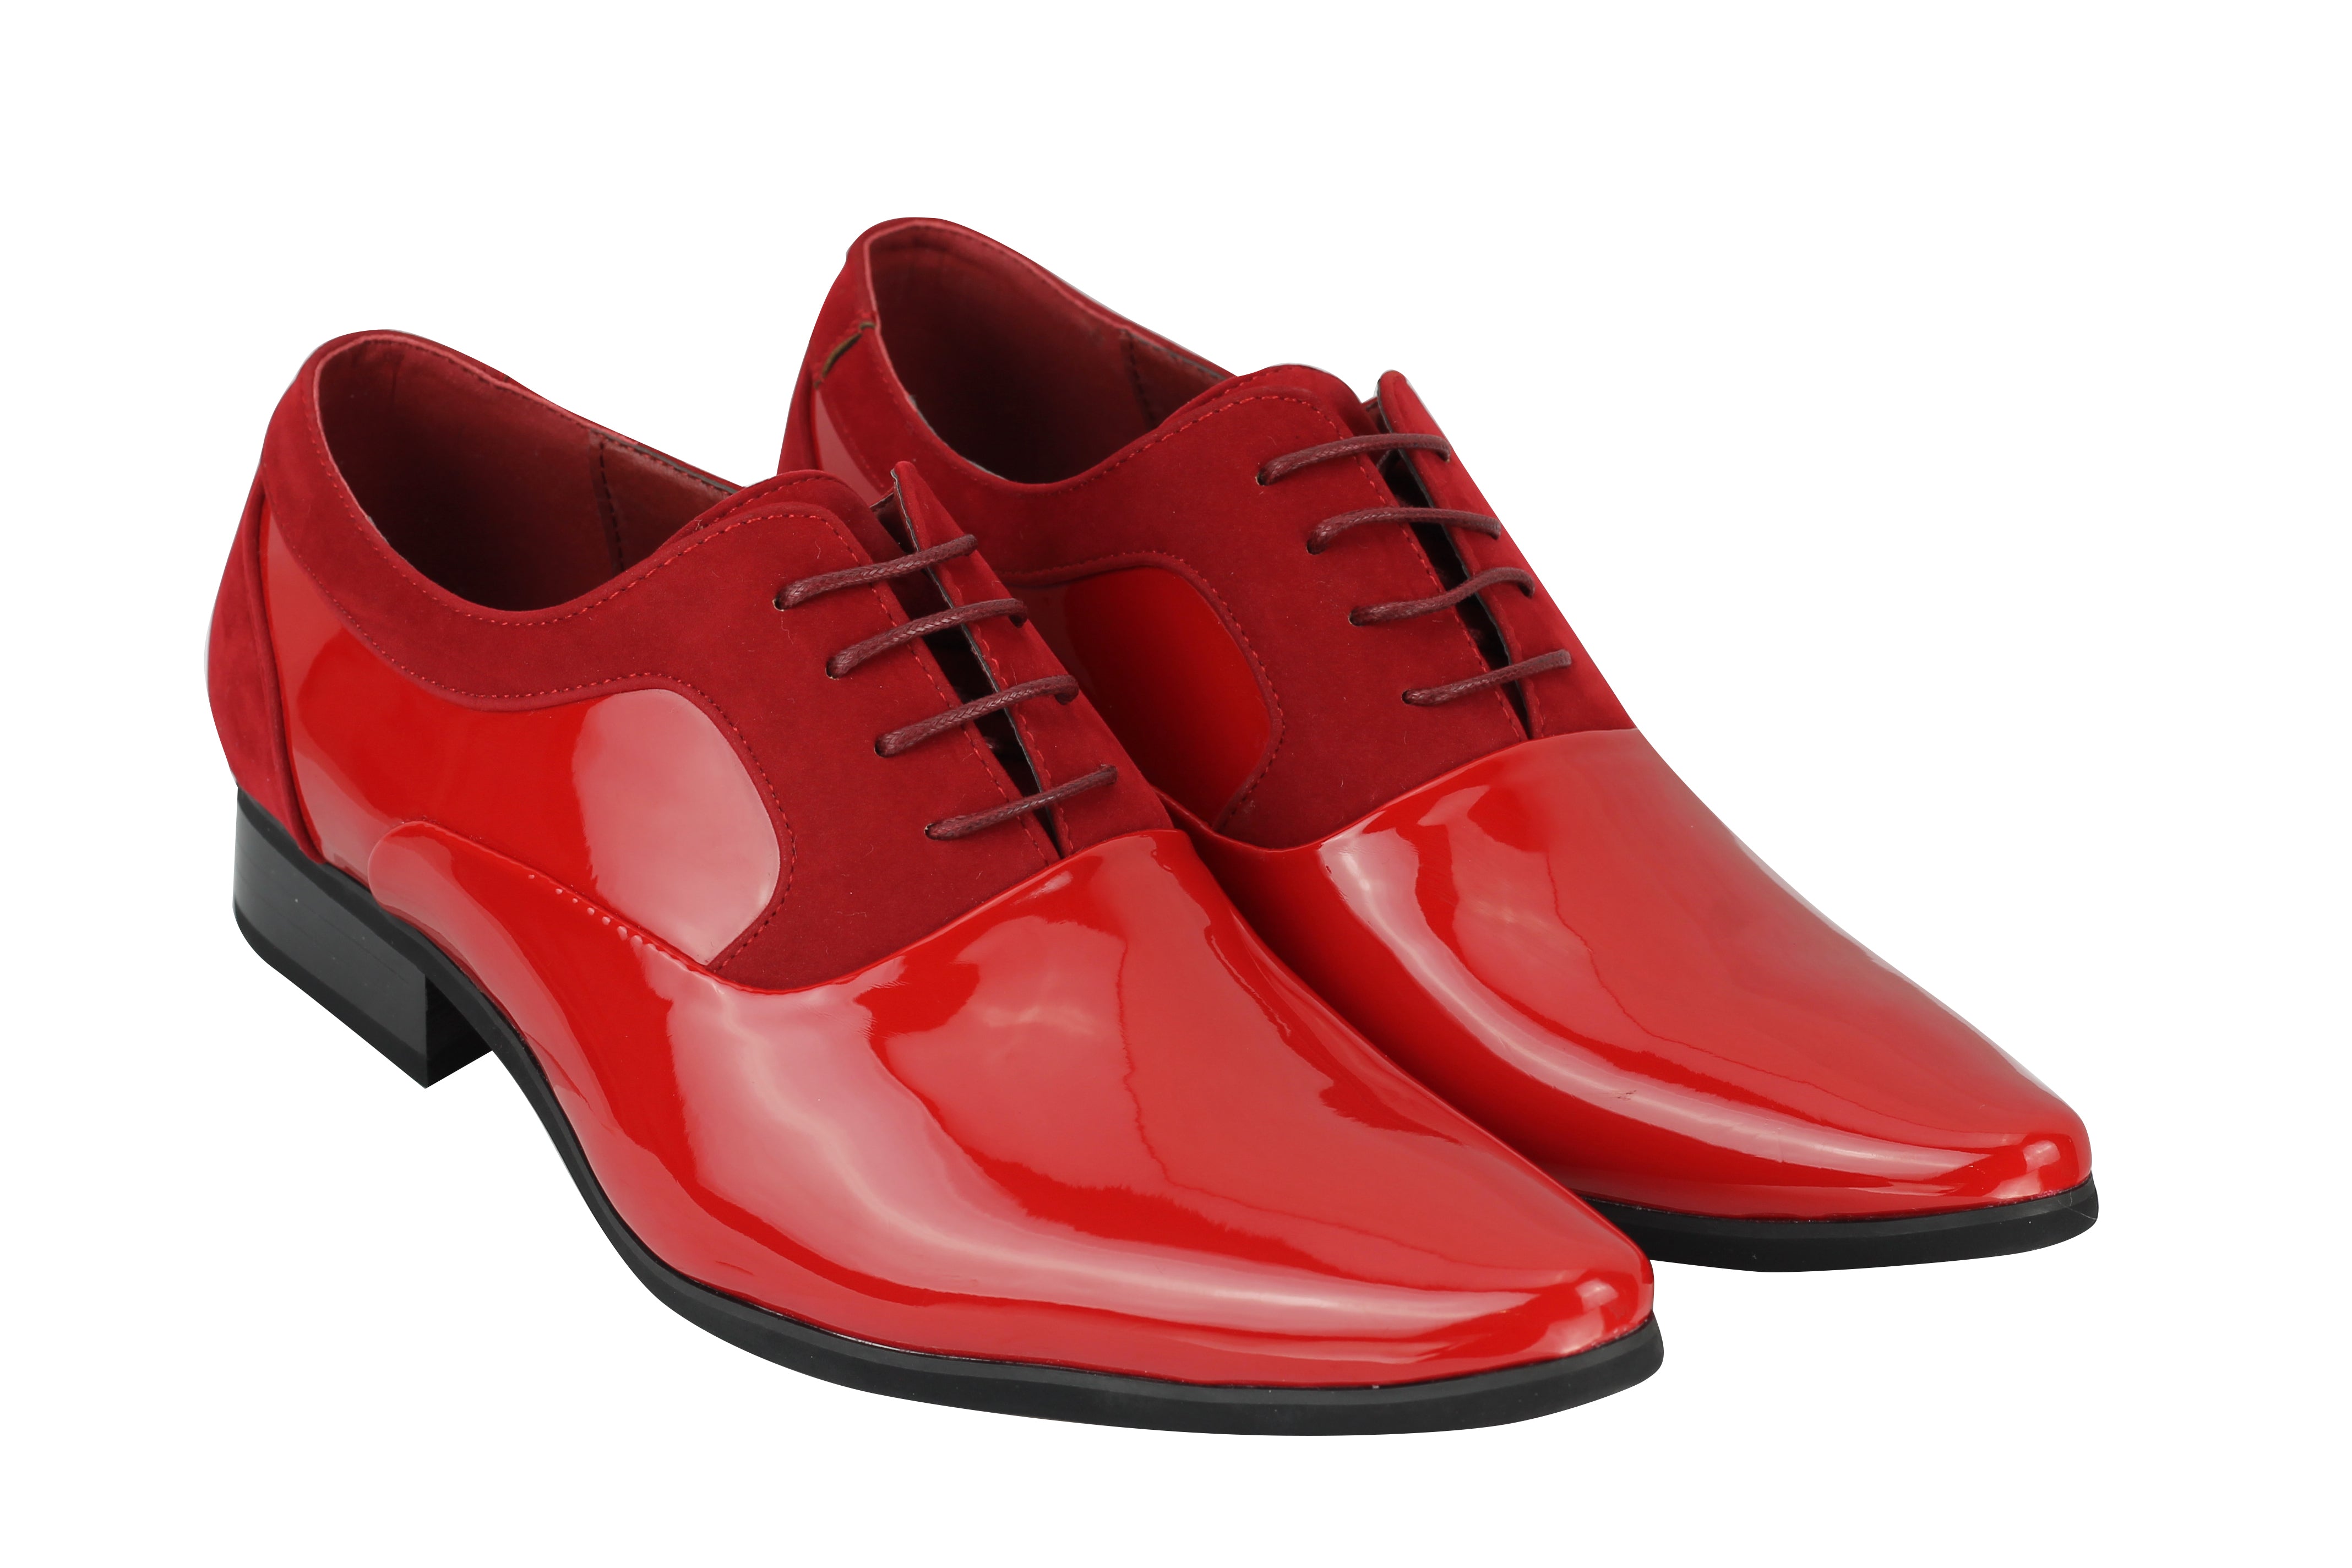 Shiny Patent Leather Formal Lace Up Shoes In Red